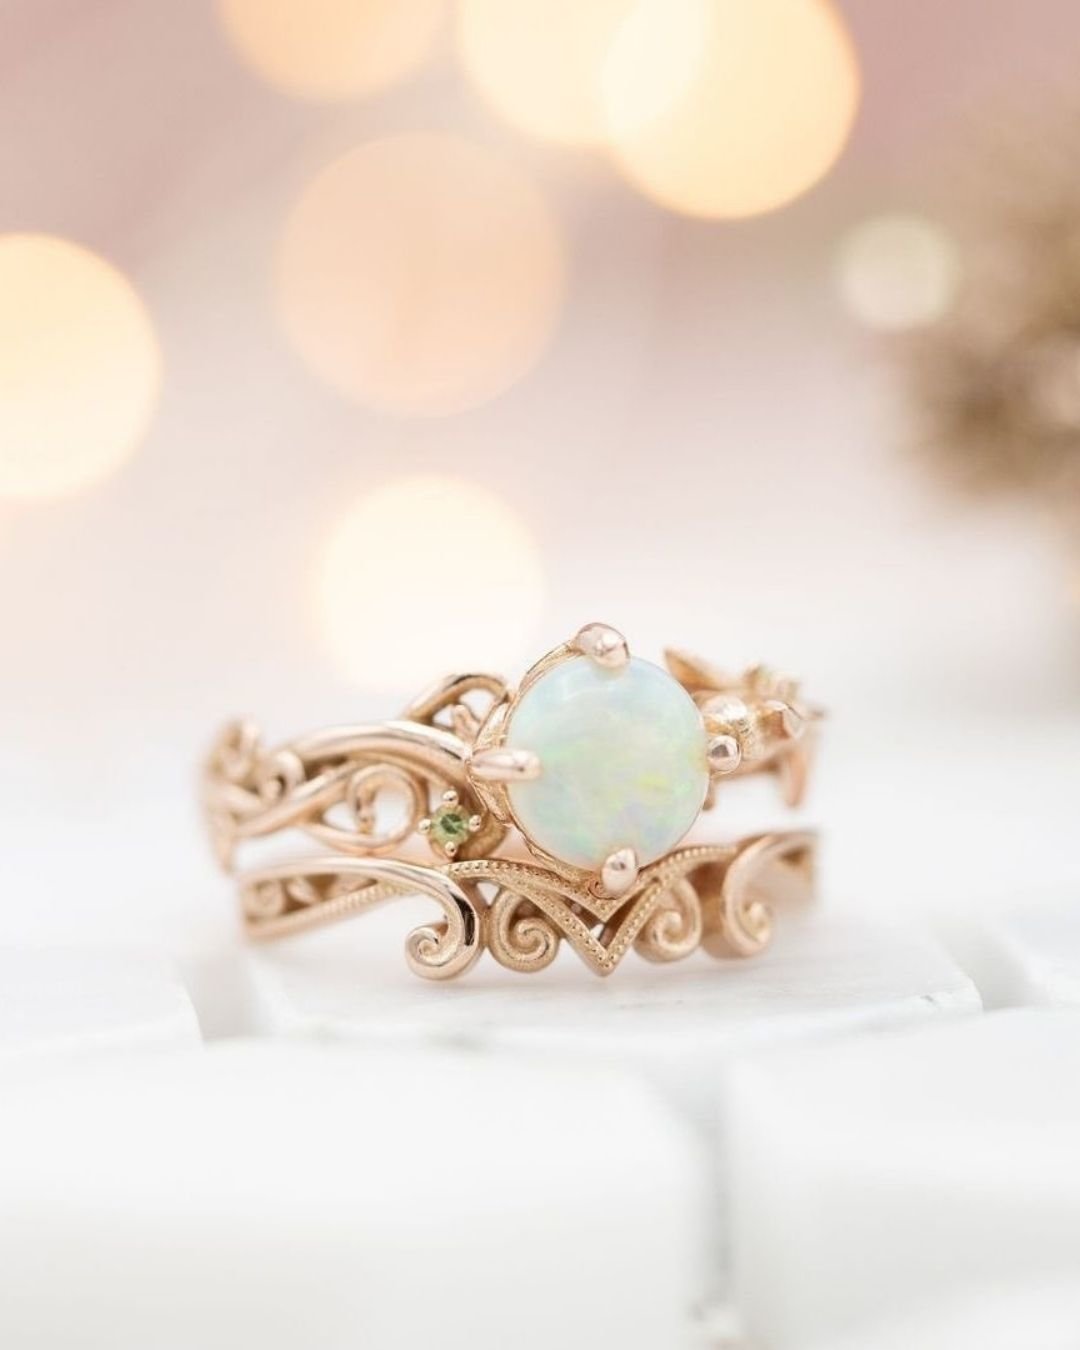 opal engagement rings in vintage style2